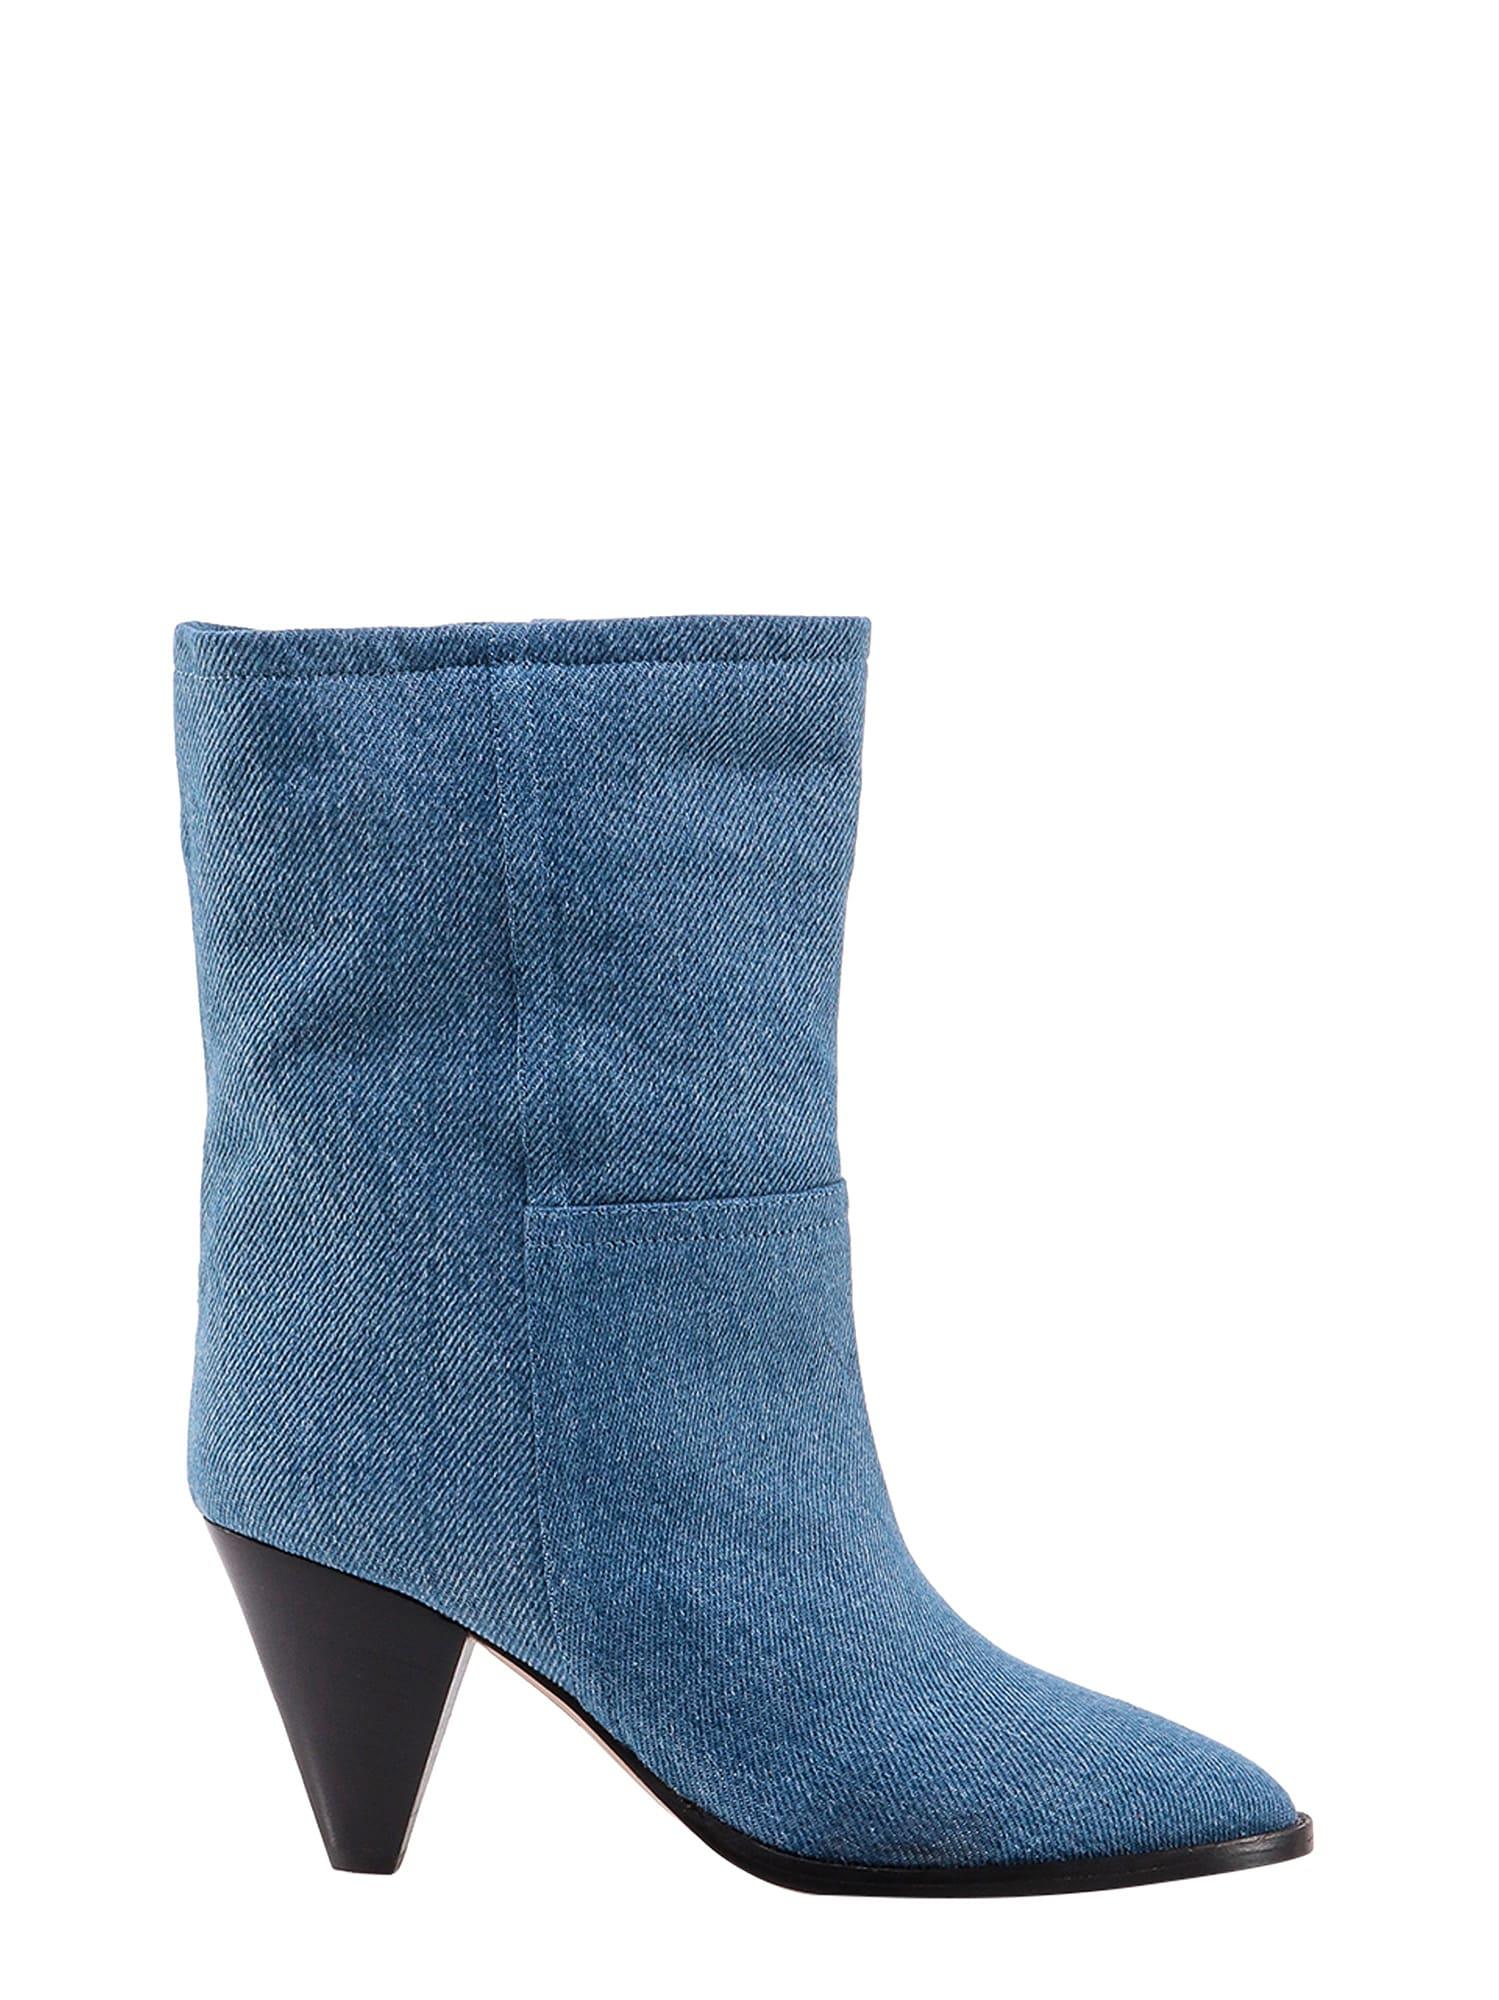 Isabel Marant Rouxa Ankle Boots in Blue | Lyst